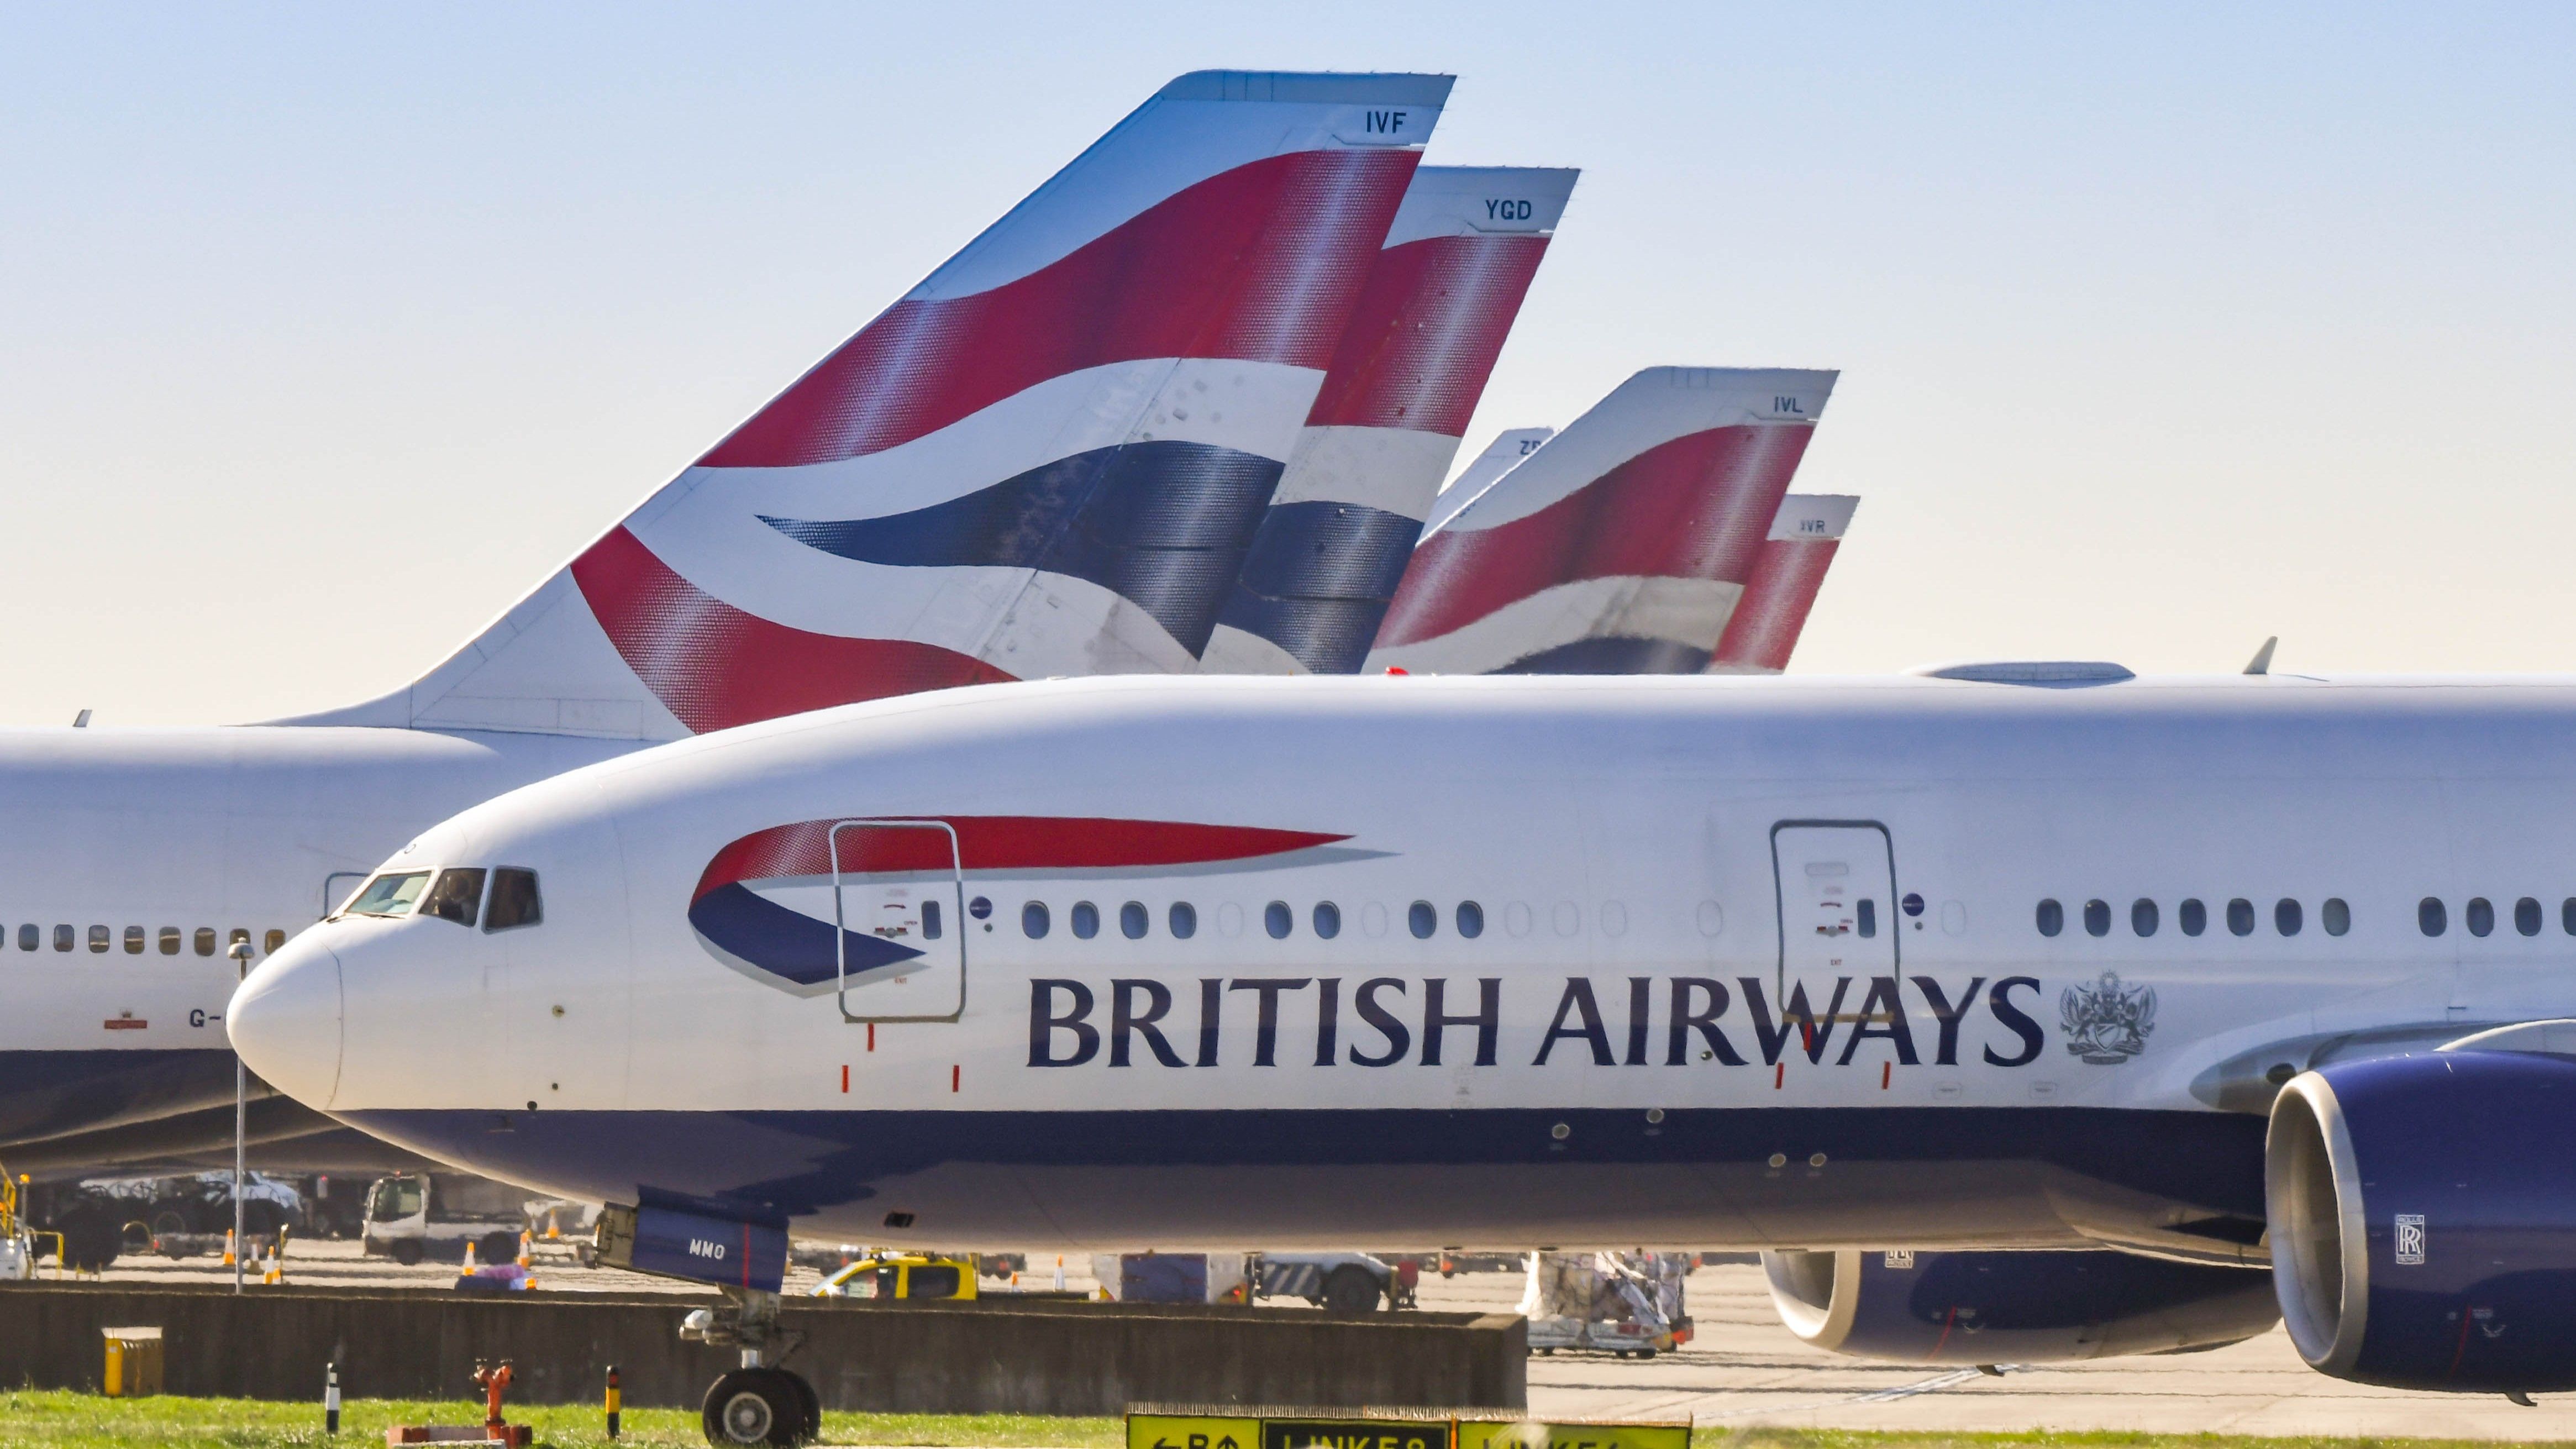 Several British Airways aircraft on an airport apron.